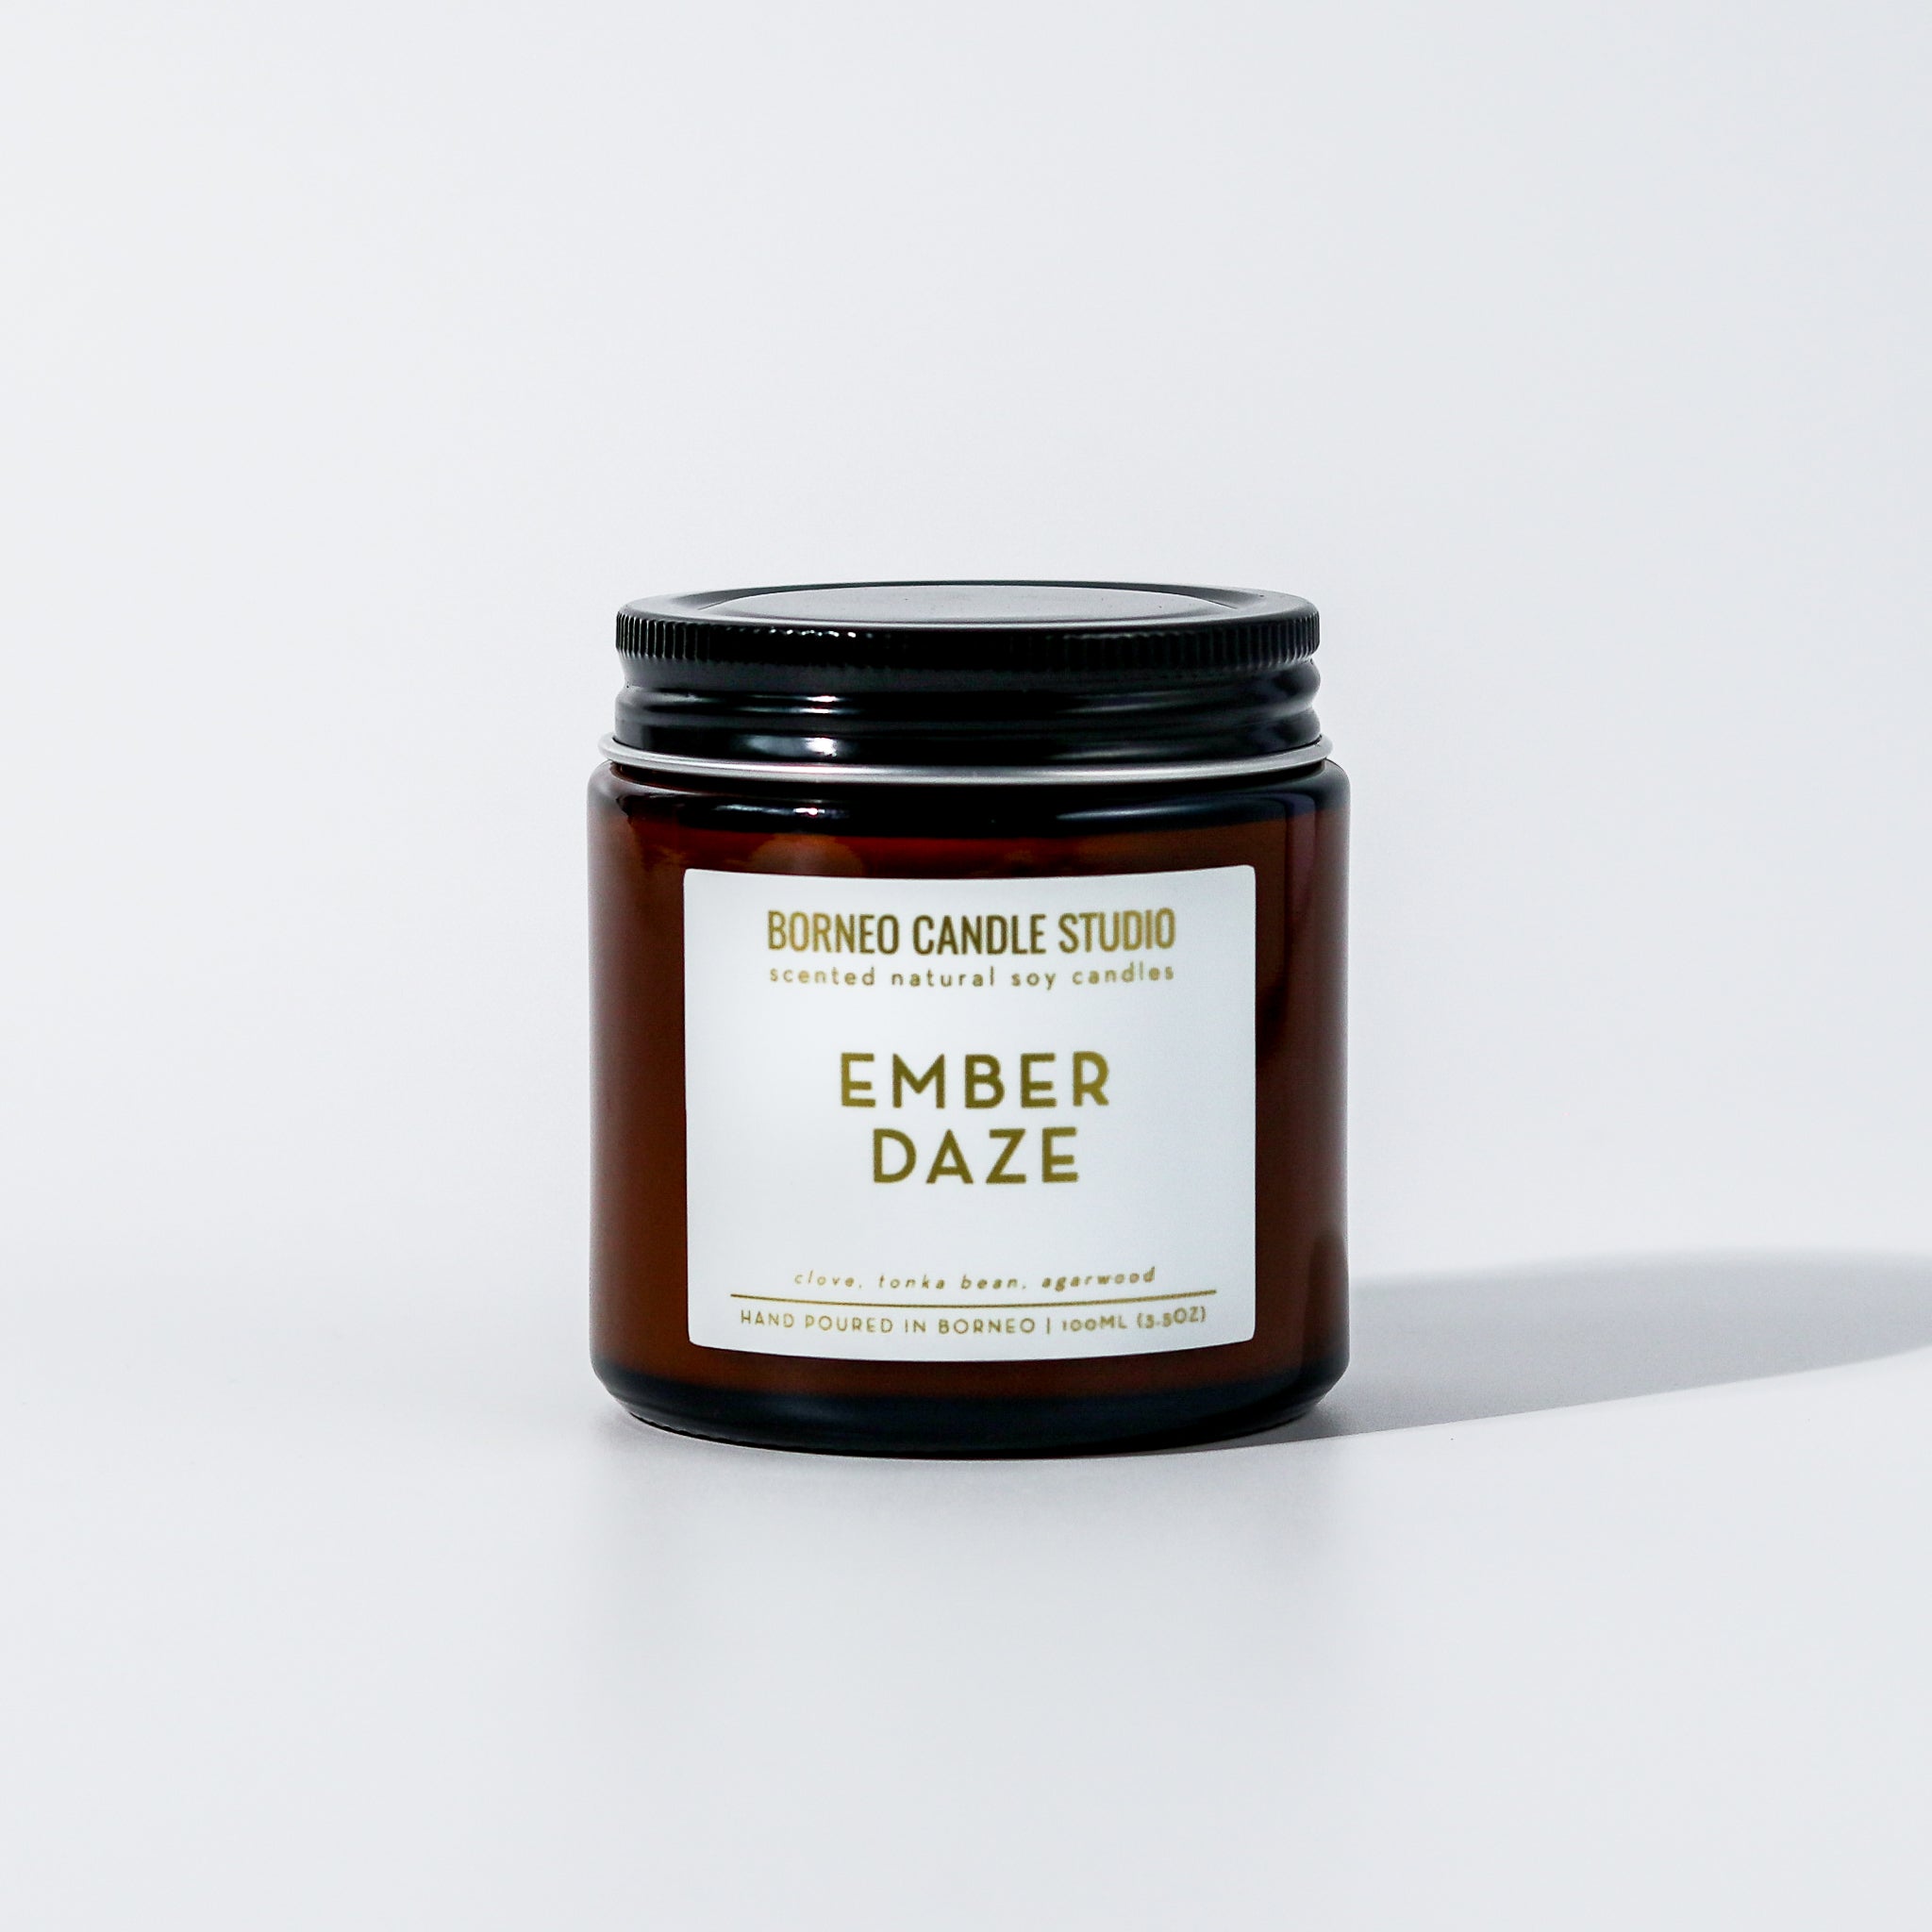 Ember Daze Holiday Christmas Scented Candle Borneo Candle Studio with notes of clove, tonka bean and agarwood